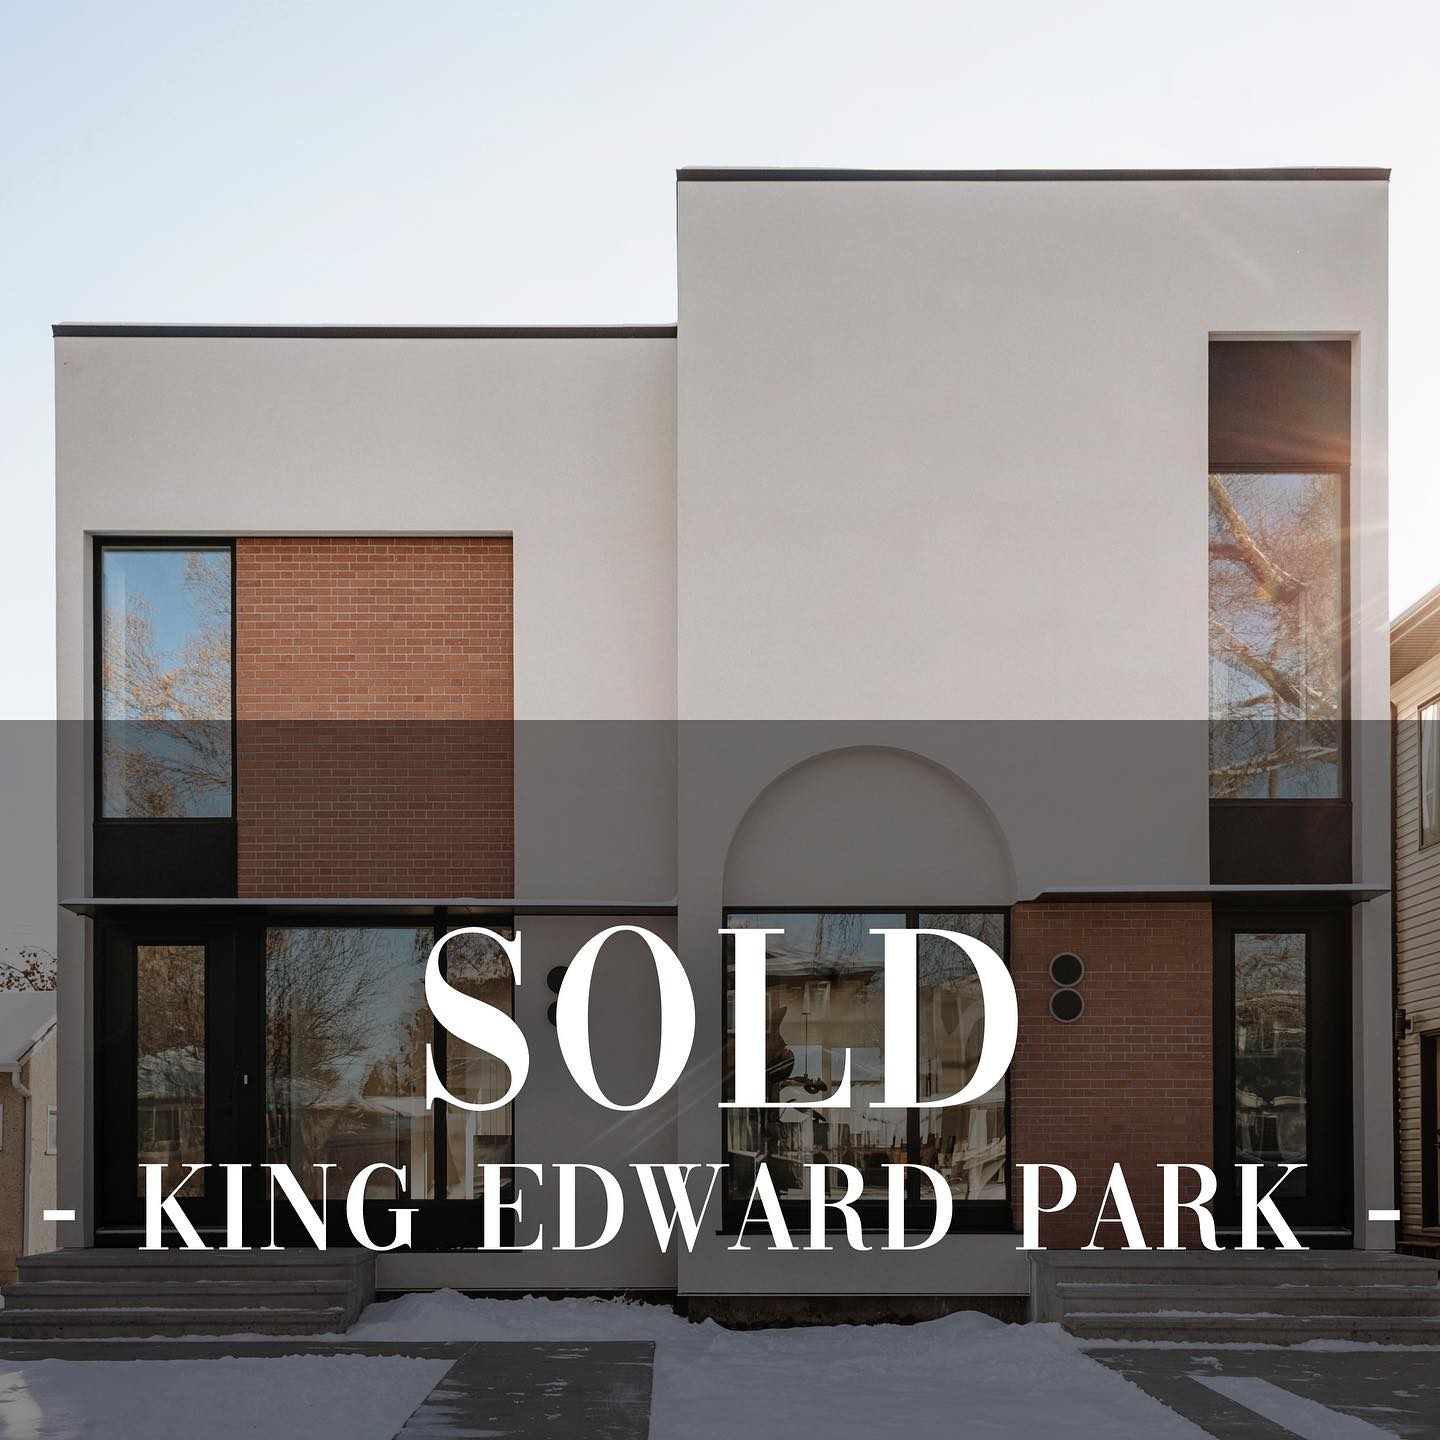 | SOLD 
7709 79 AVE NW
KING EDWARD PARK

OTHER SIDE CURRENTLY AVAILABLE

Builder…